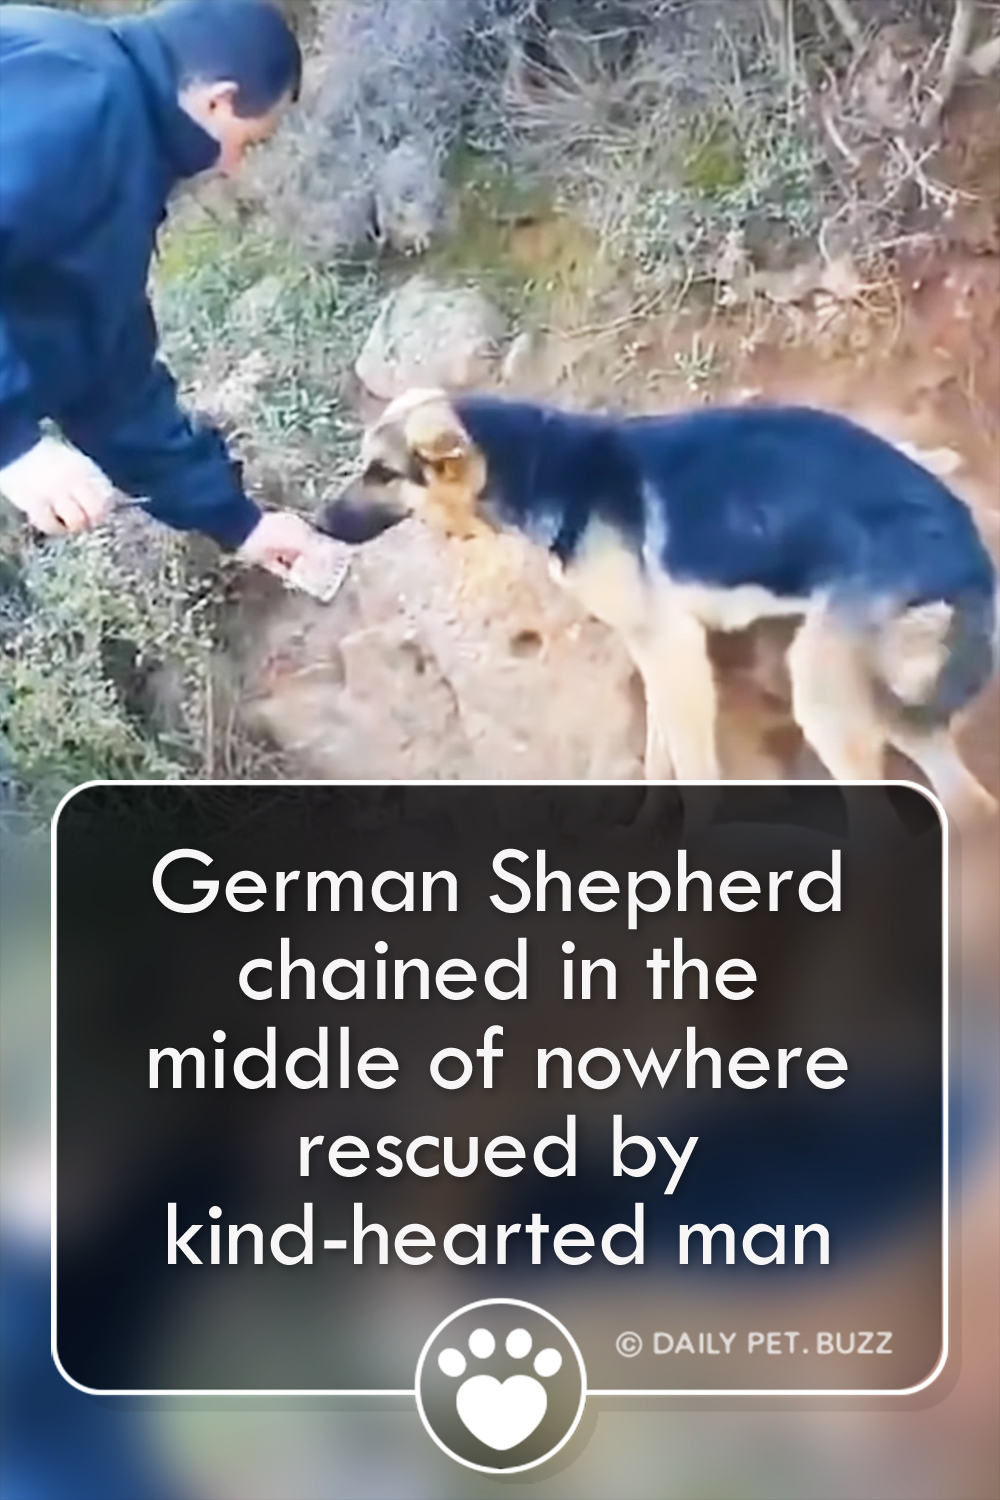 German Shepherd chained in the middle of nowhere rescued by kind-hearted man